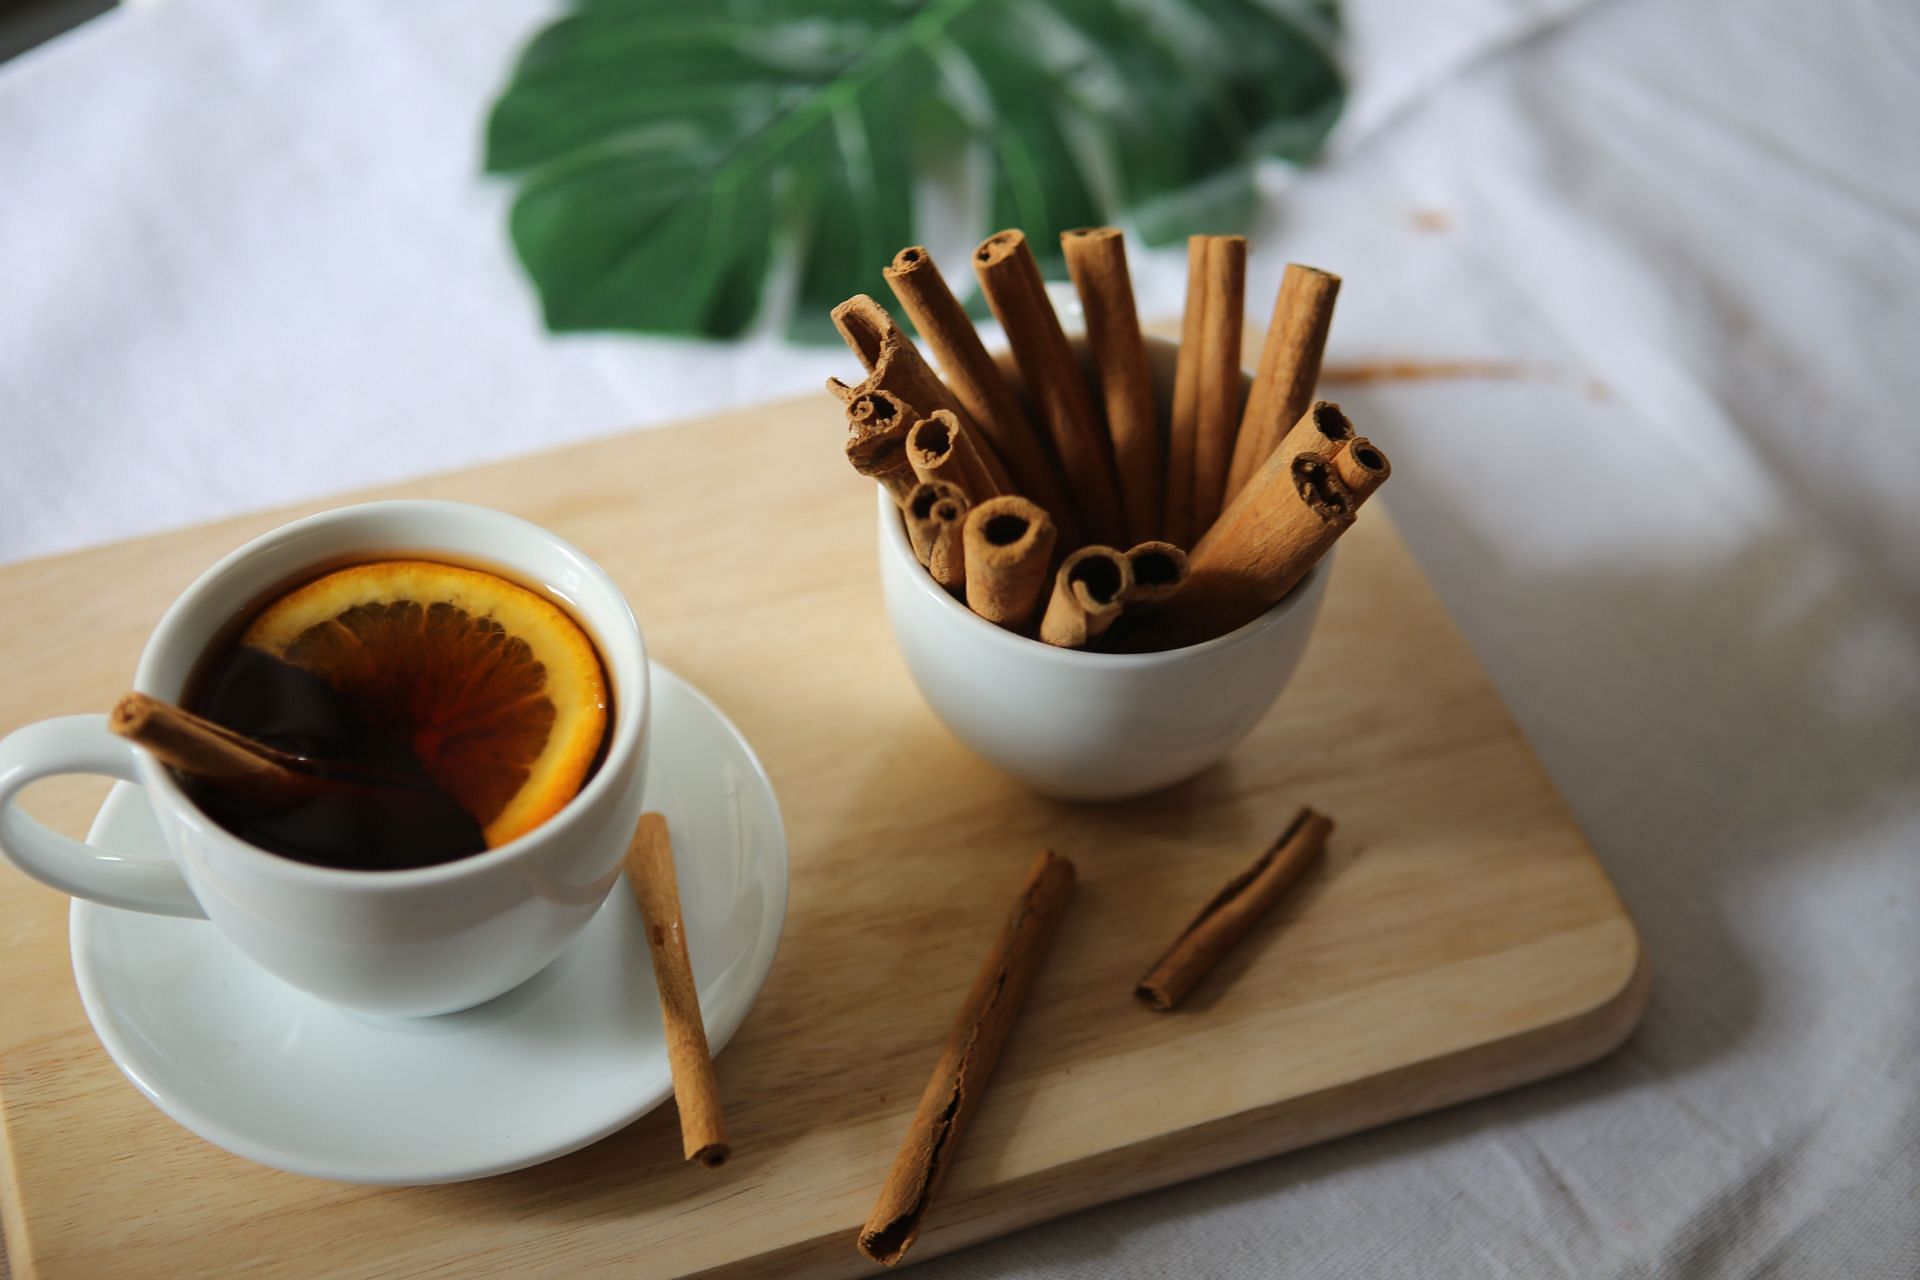 Add a sprinkle of cinnamon to your day for better blood sugar control. (Image via Pexels)